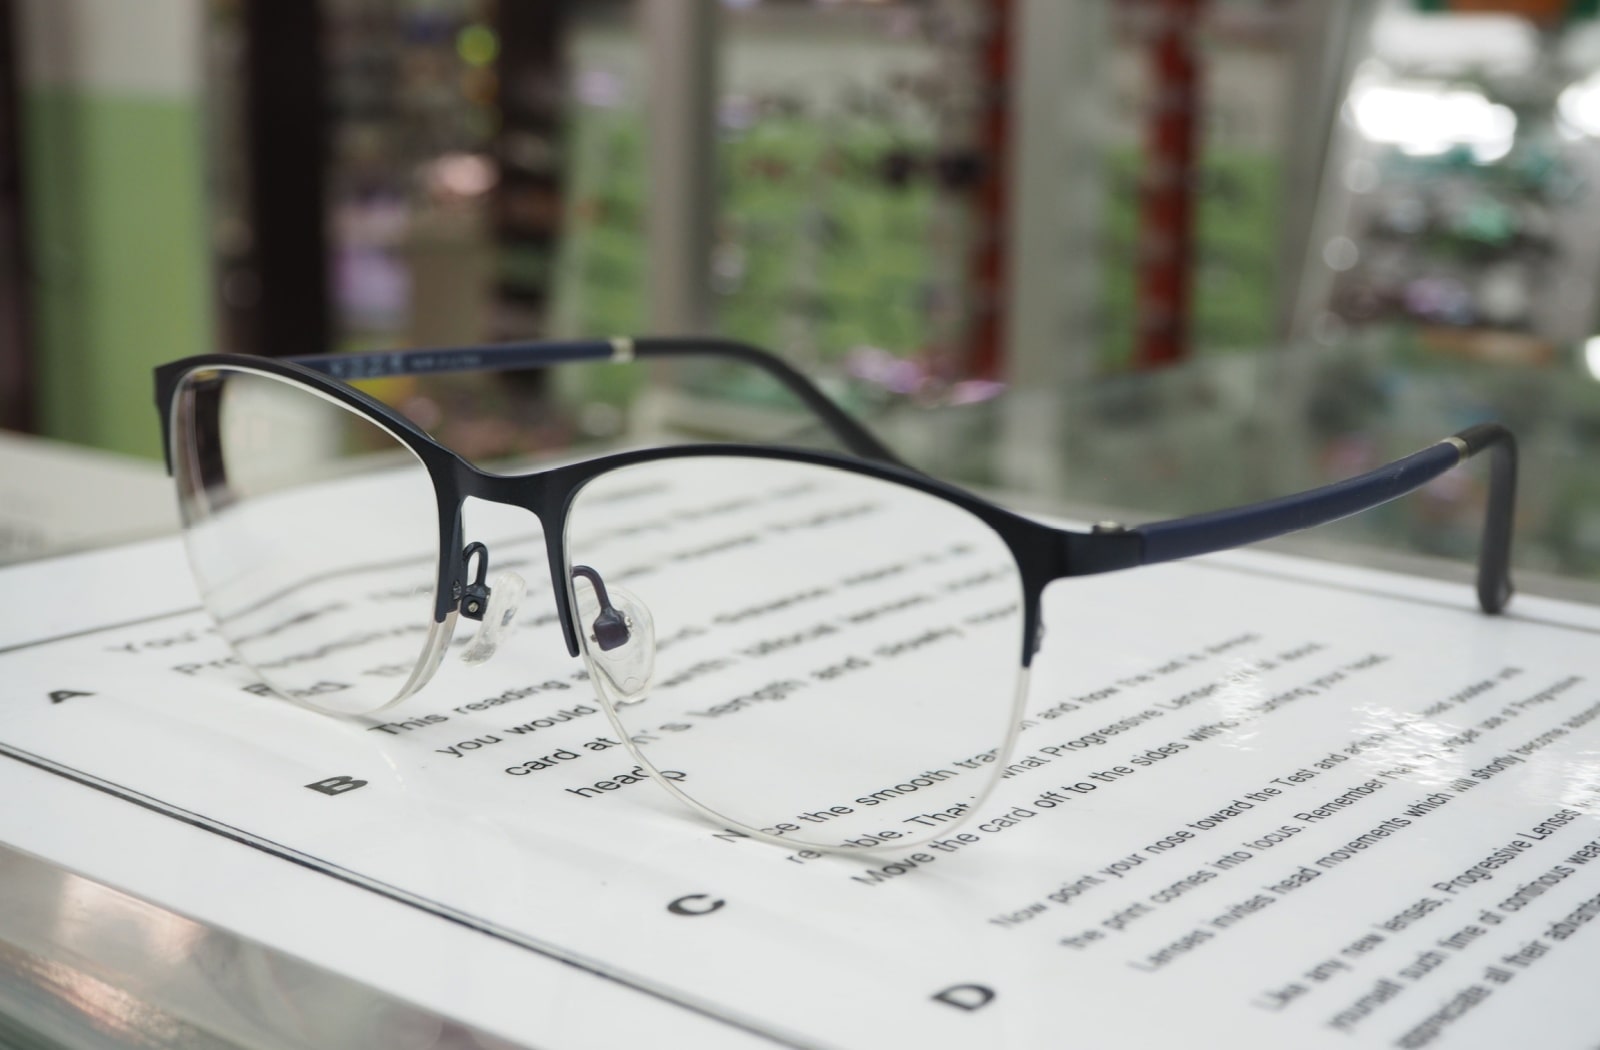 A pair of reading glasses sitting on top of a book